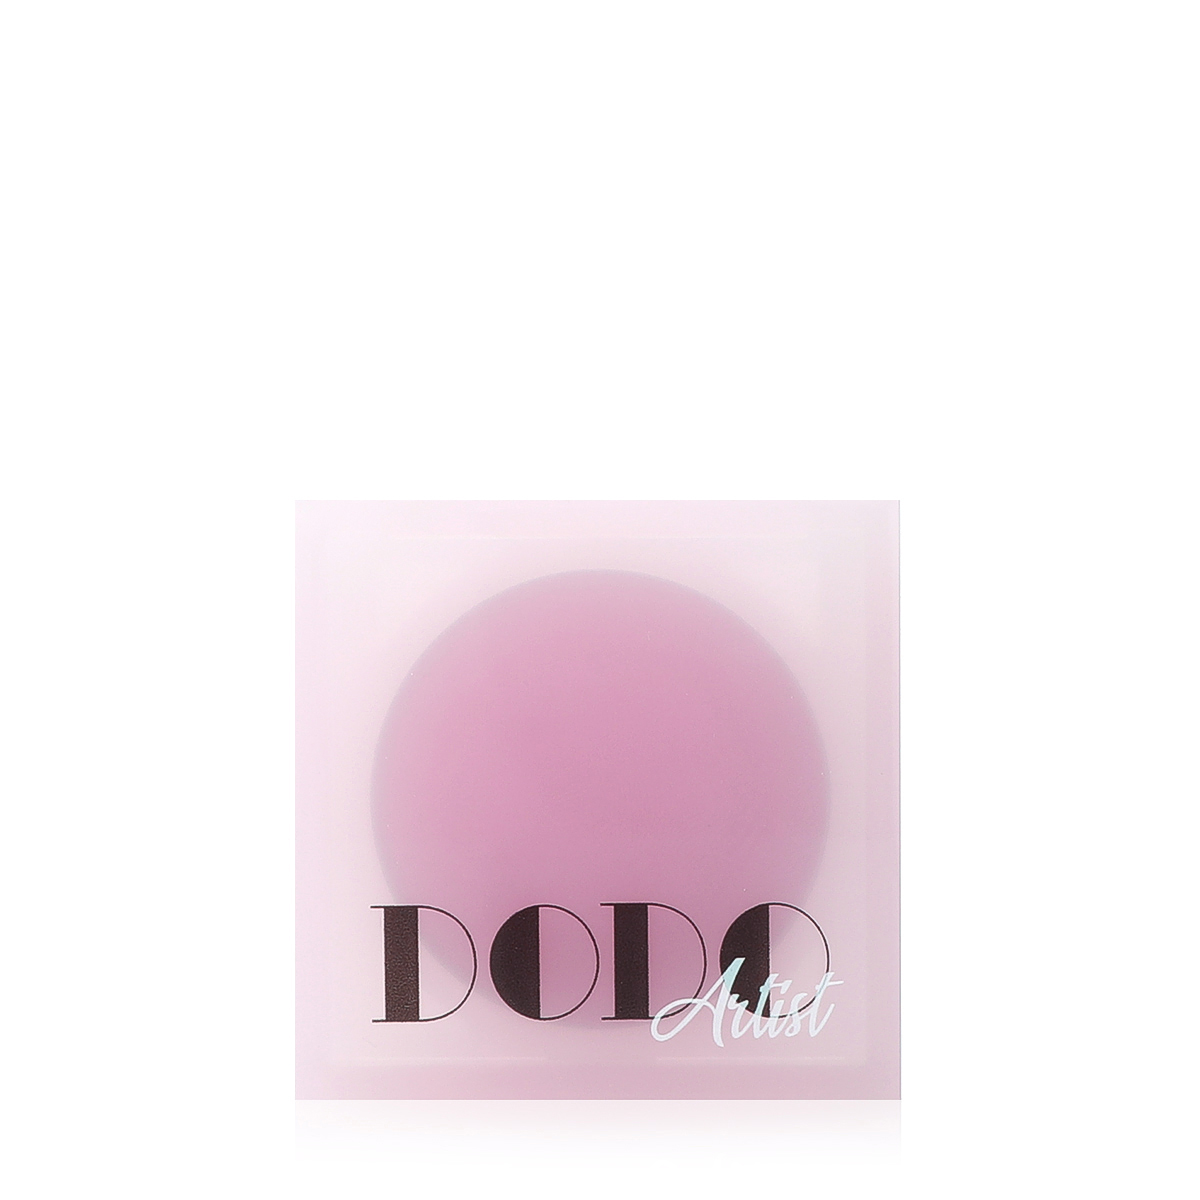 Buy The Pink Pearls Blush - 30g Online in United Arab Emirates